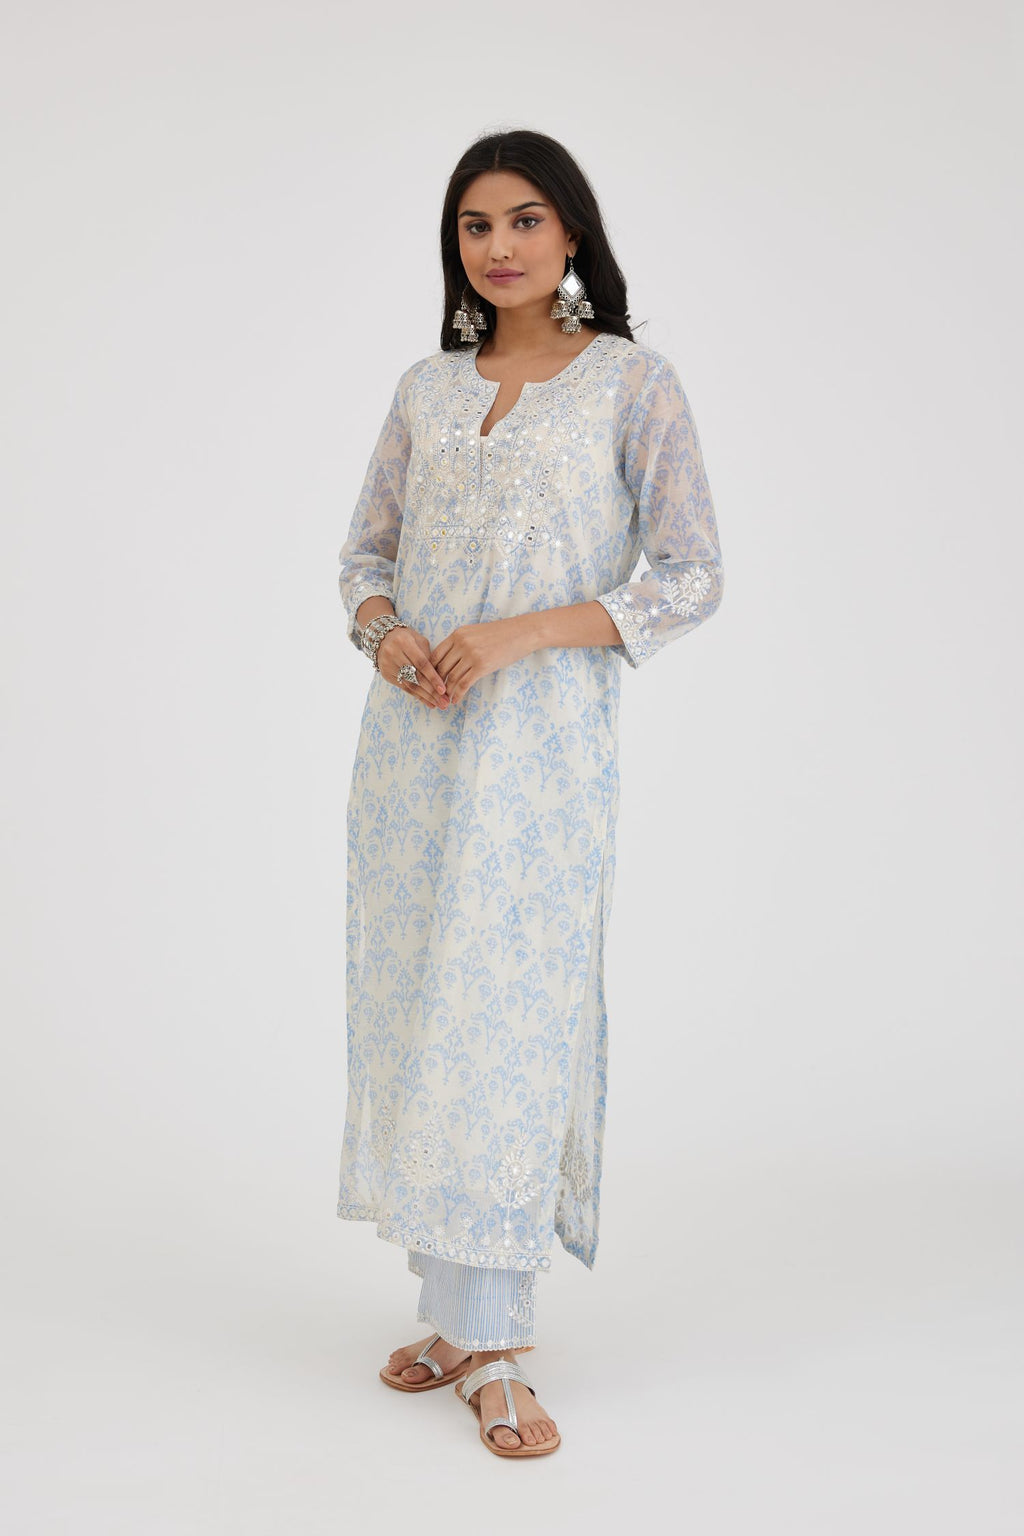 Ikat design blue and off white hand block-printed Cotton Chanderi straight long kurta set, highlighted with off-white thread and mirror embroidery..